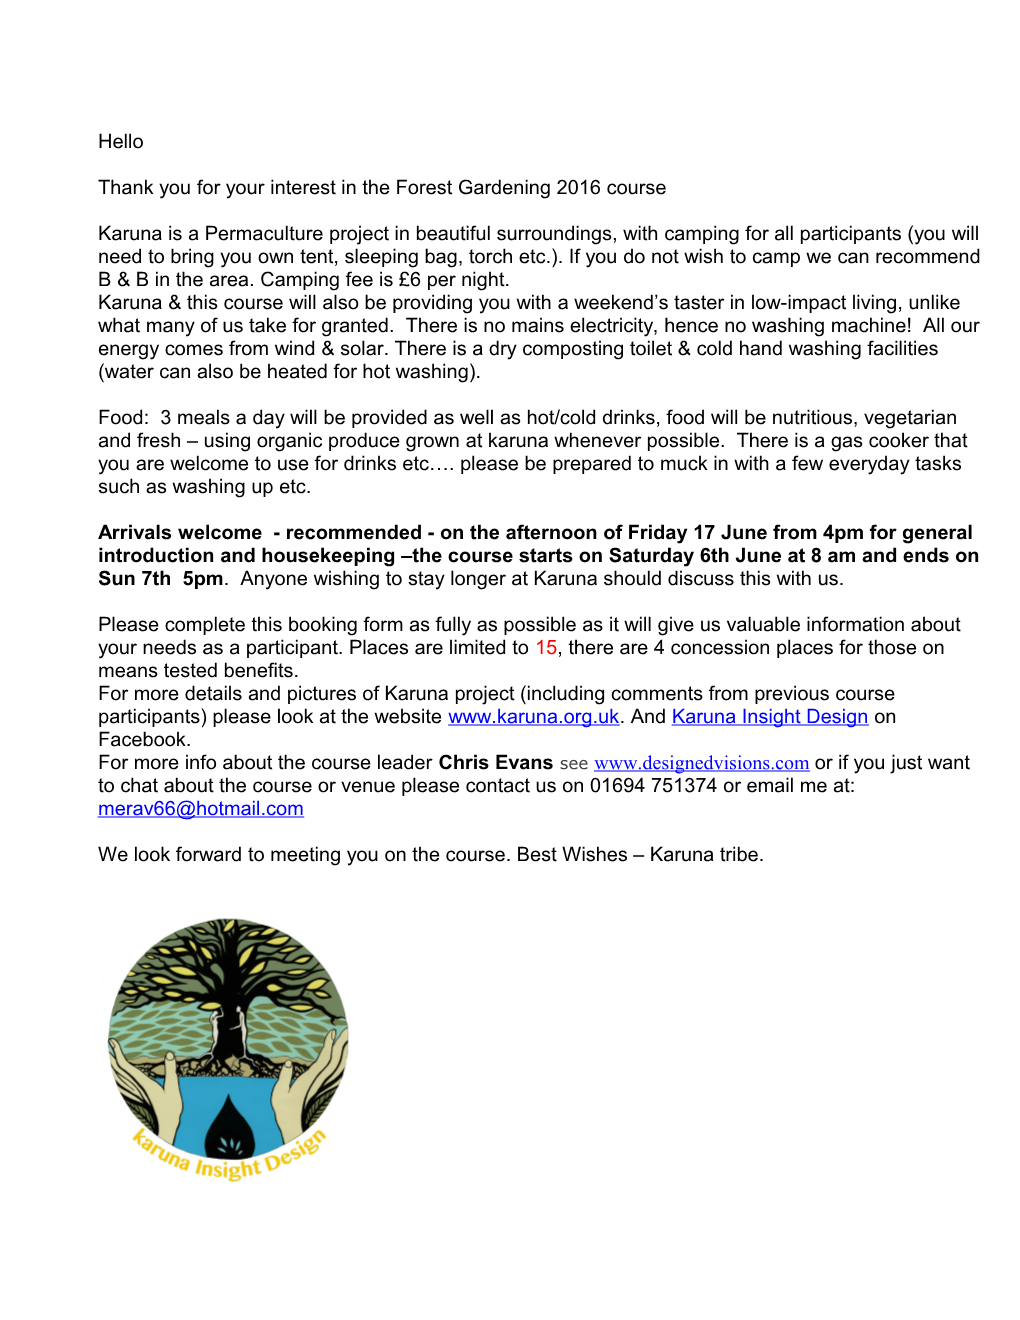 Thank You for Your Interest in the Forest Gardening 2016 Course